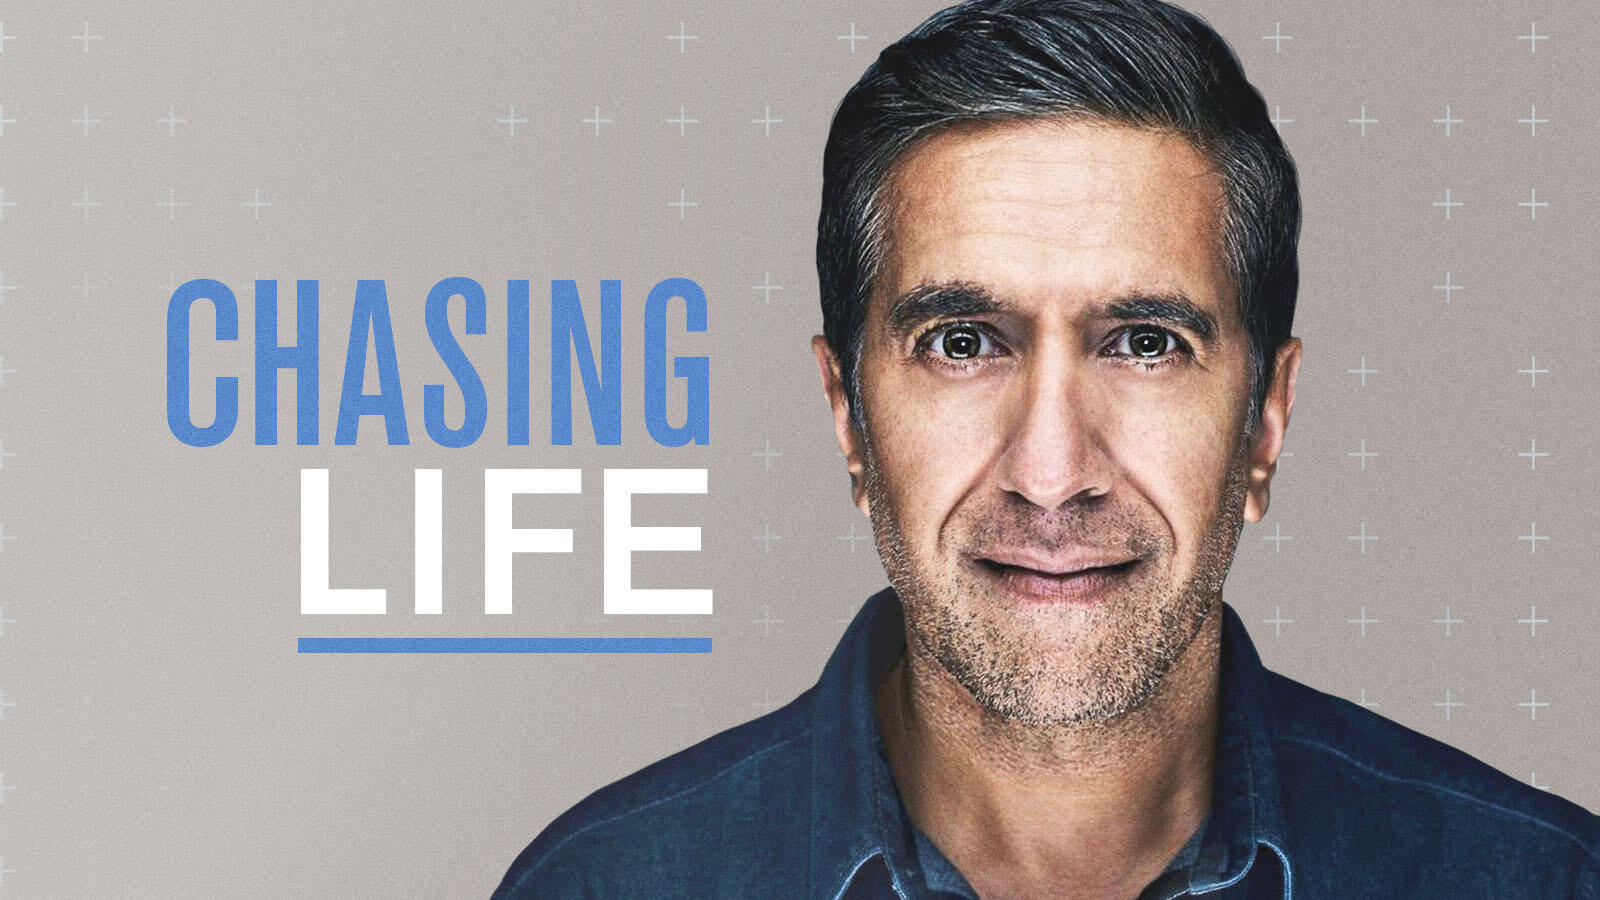 Chasing Life - Podcast on CNN Audio